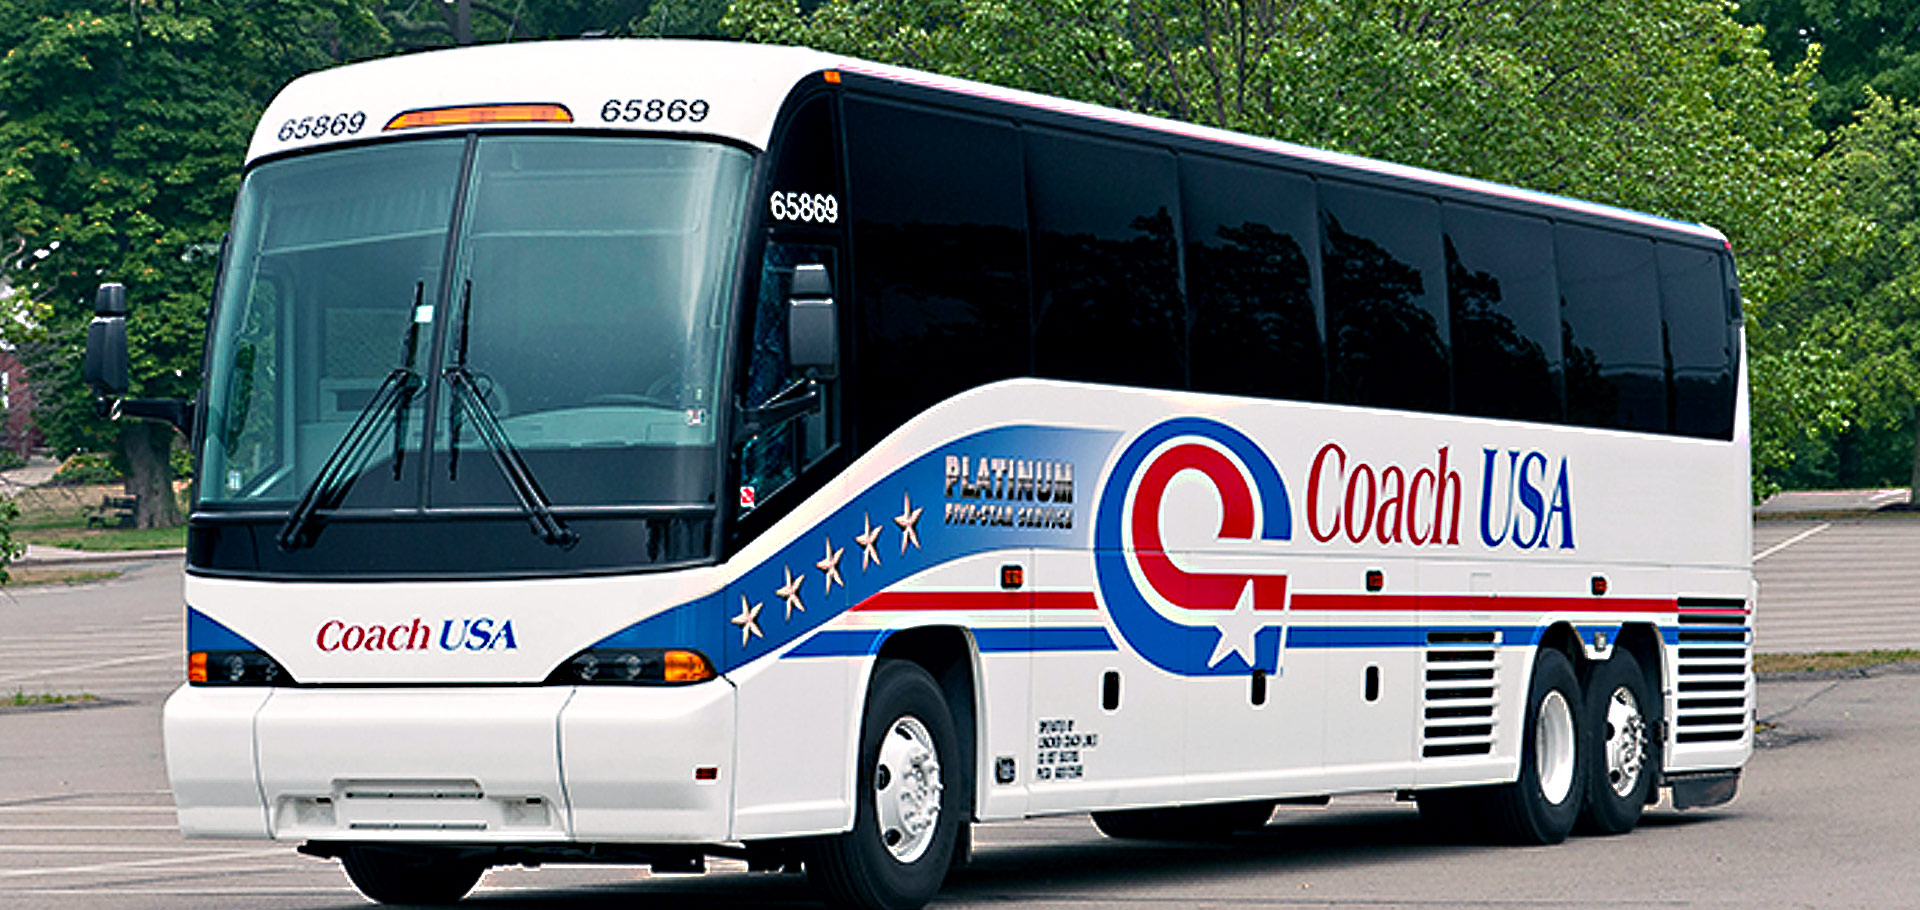 Charter bus rentals for sports fans and teams